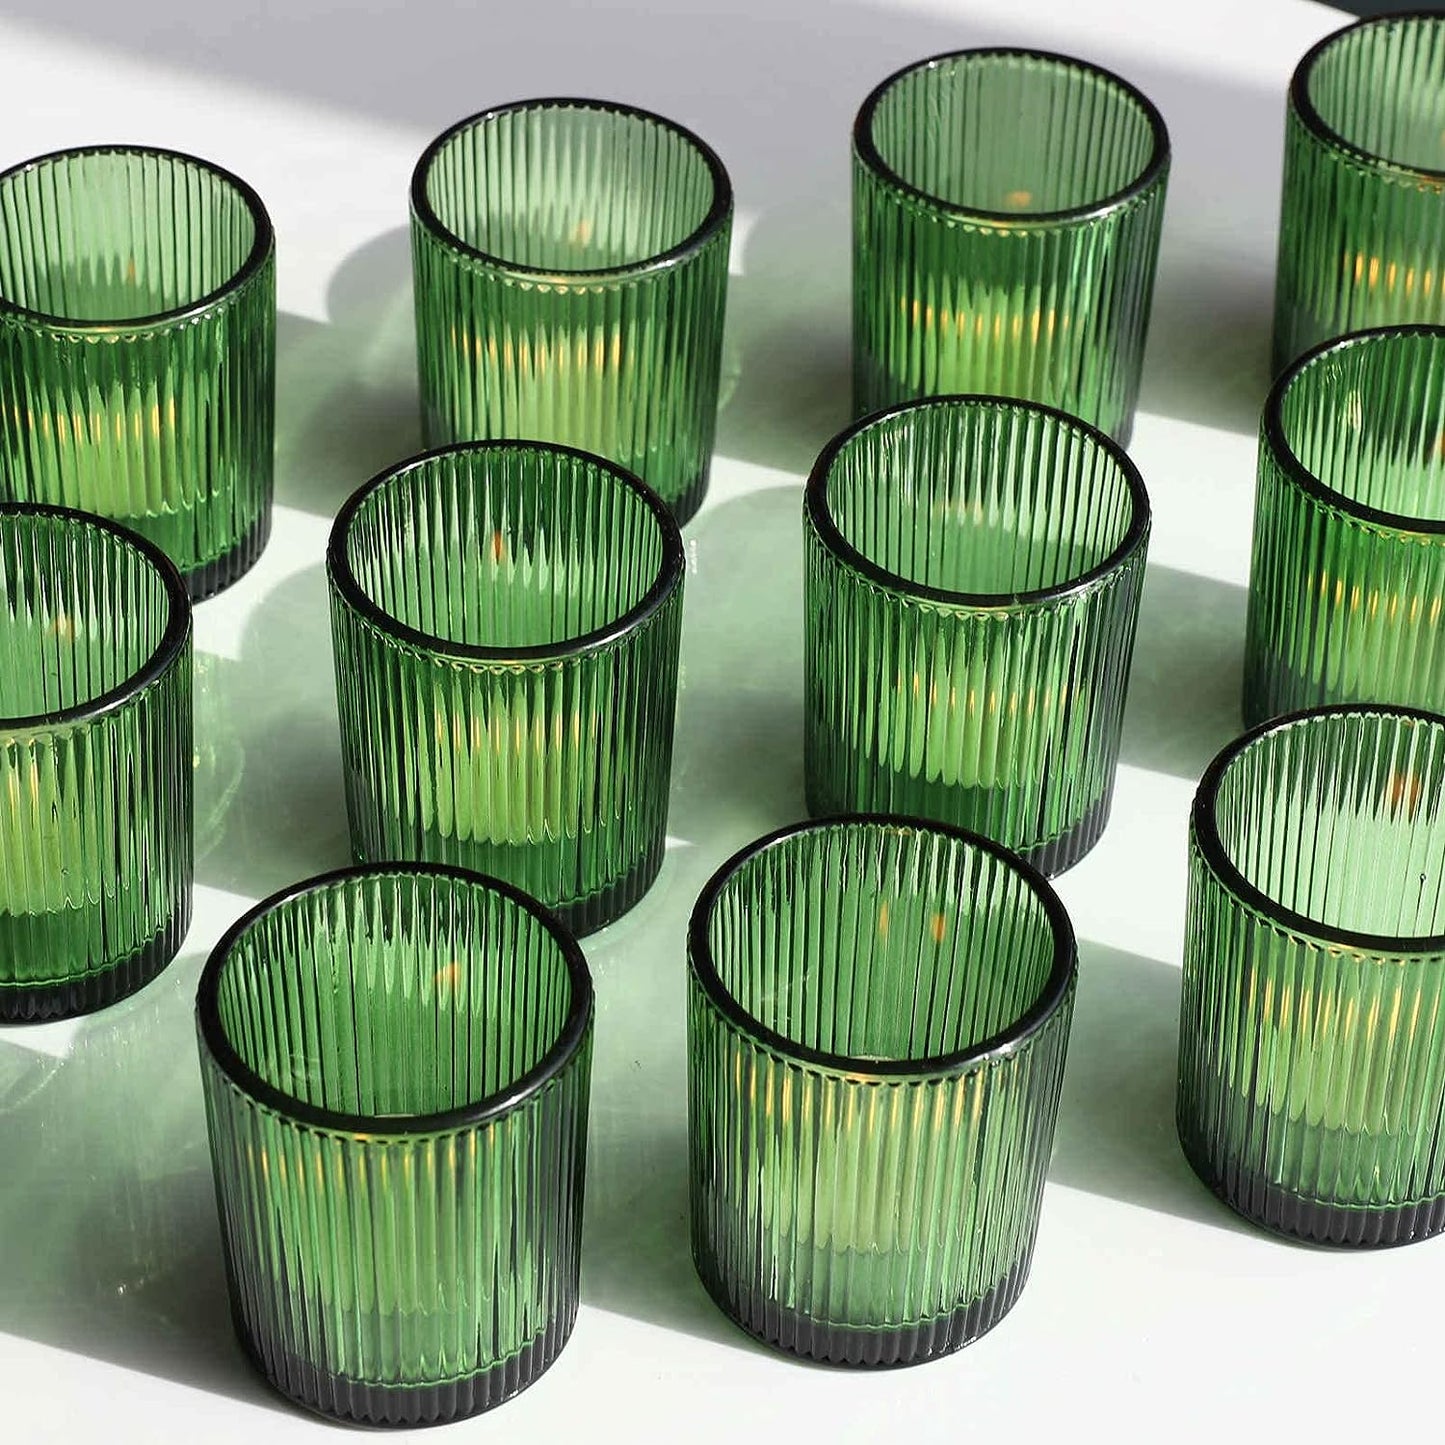 Vohocandle 12pcs Candle Holder Ribbed Glass, Green Votive Candle Holders for Wedding Party Table Centerpieces(2.1'' x 2.6'', Green) - vohocandle